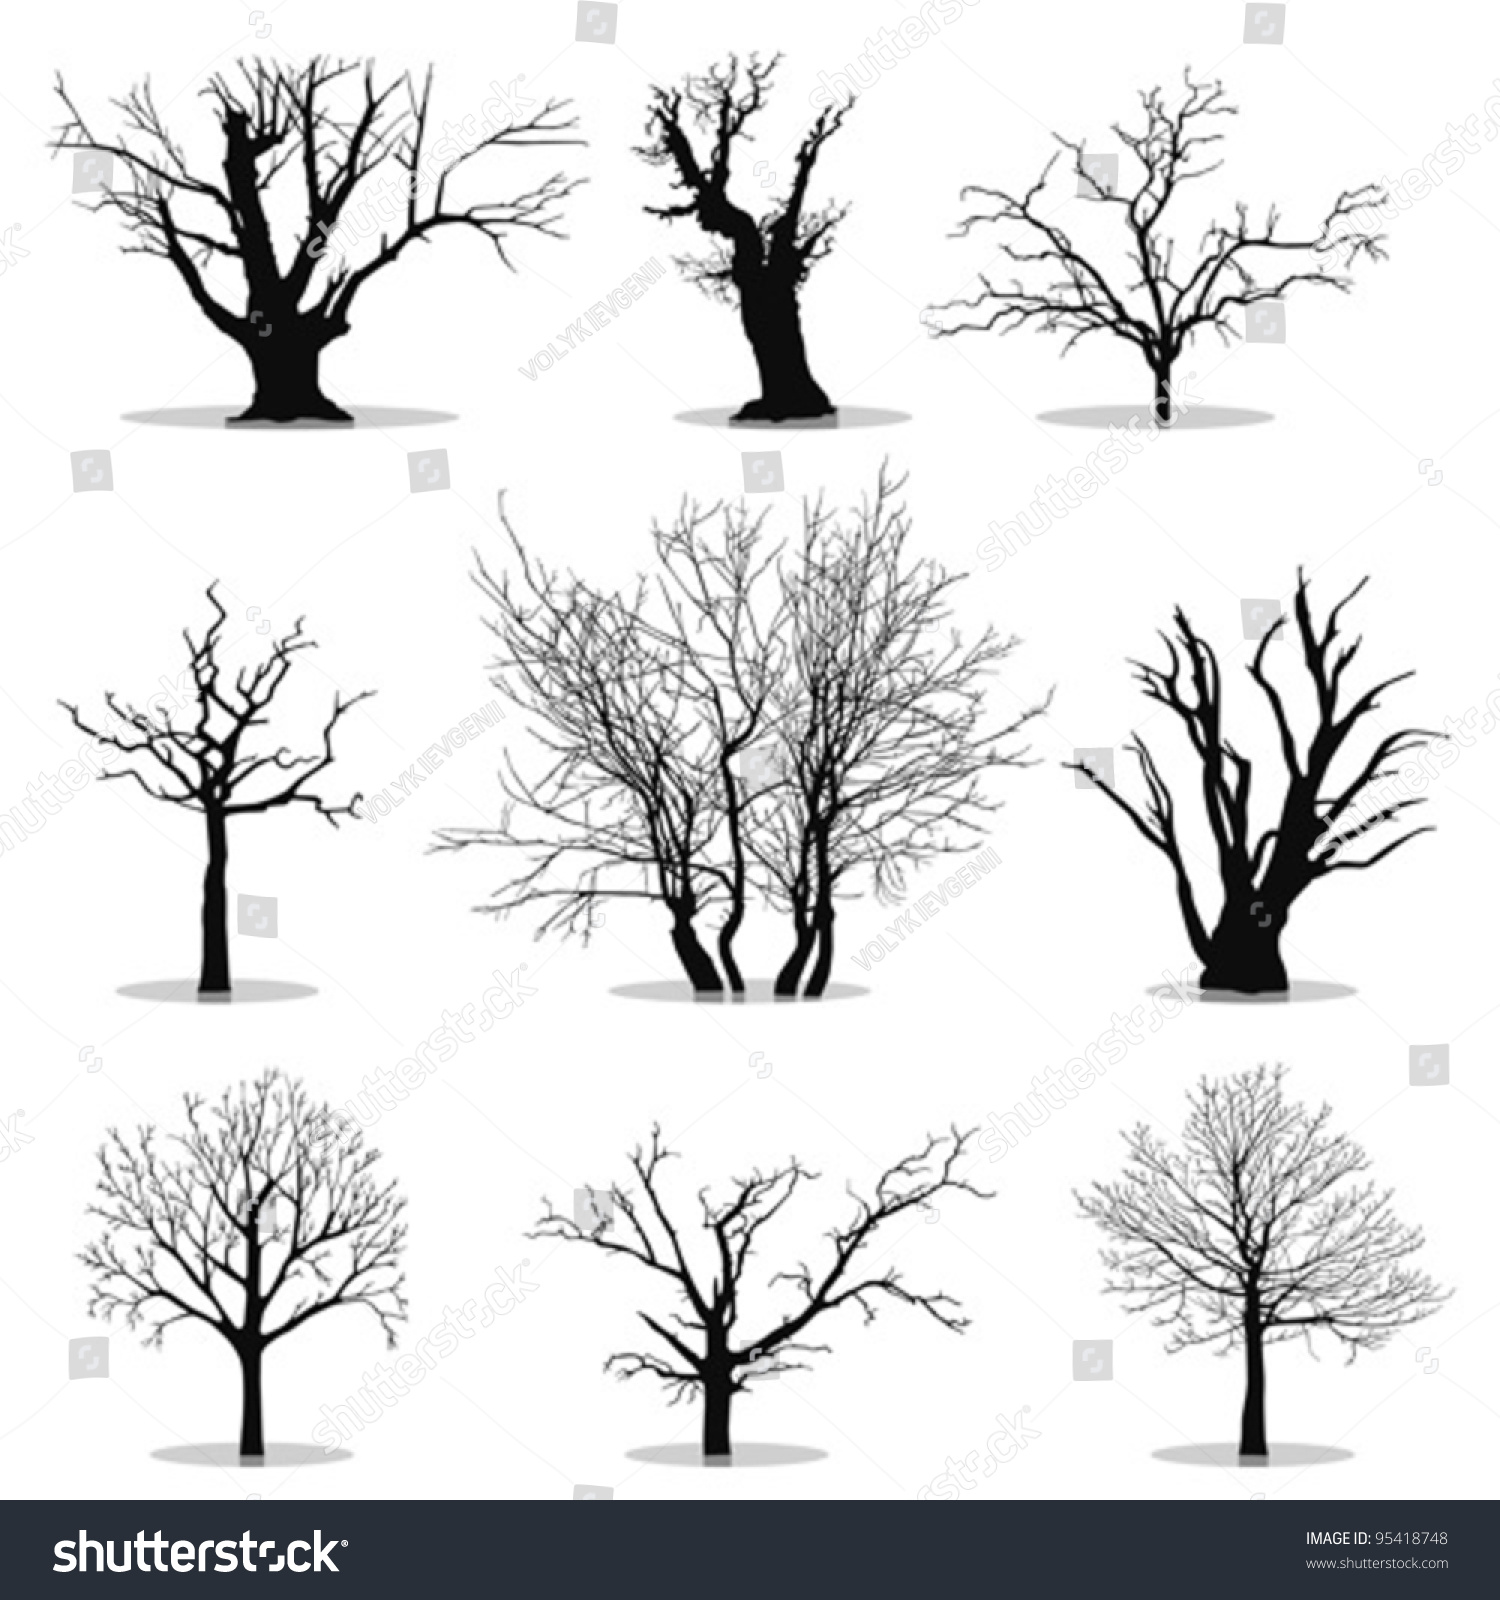 SVG of Collection of trees silhouettes svg